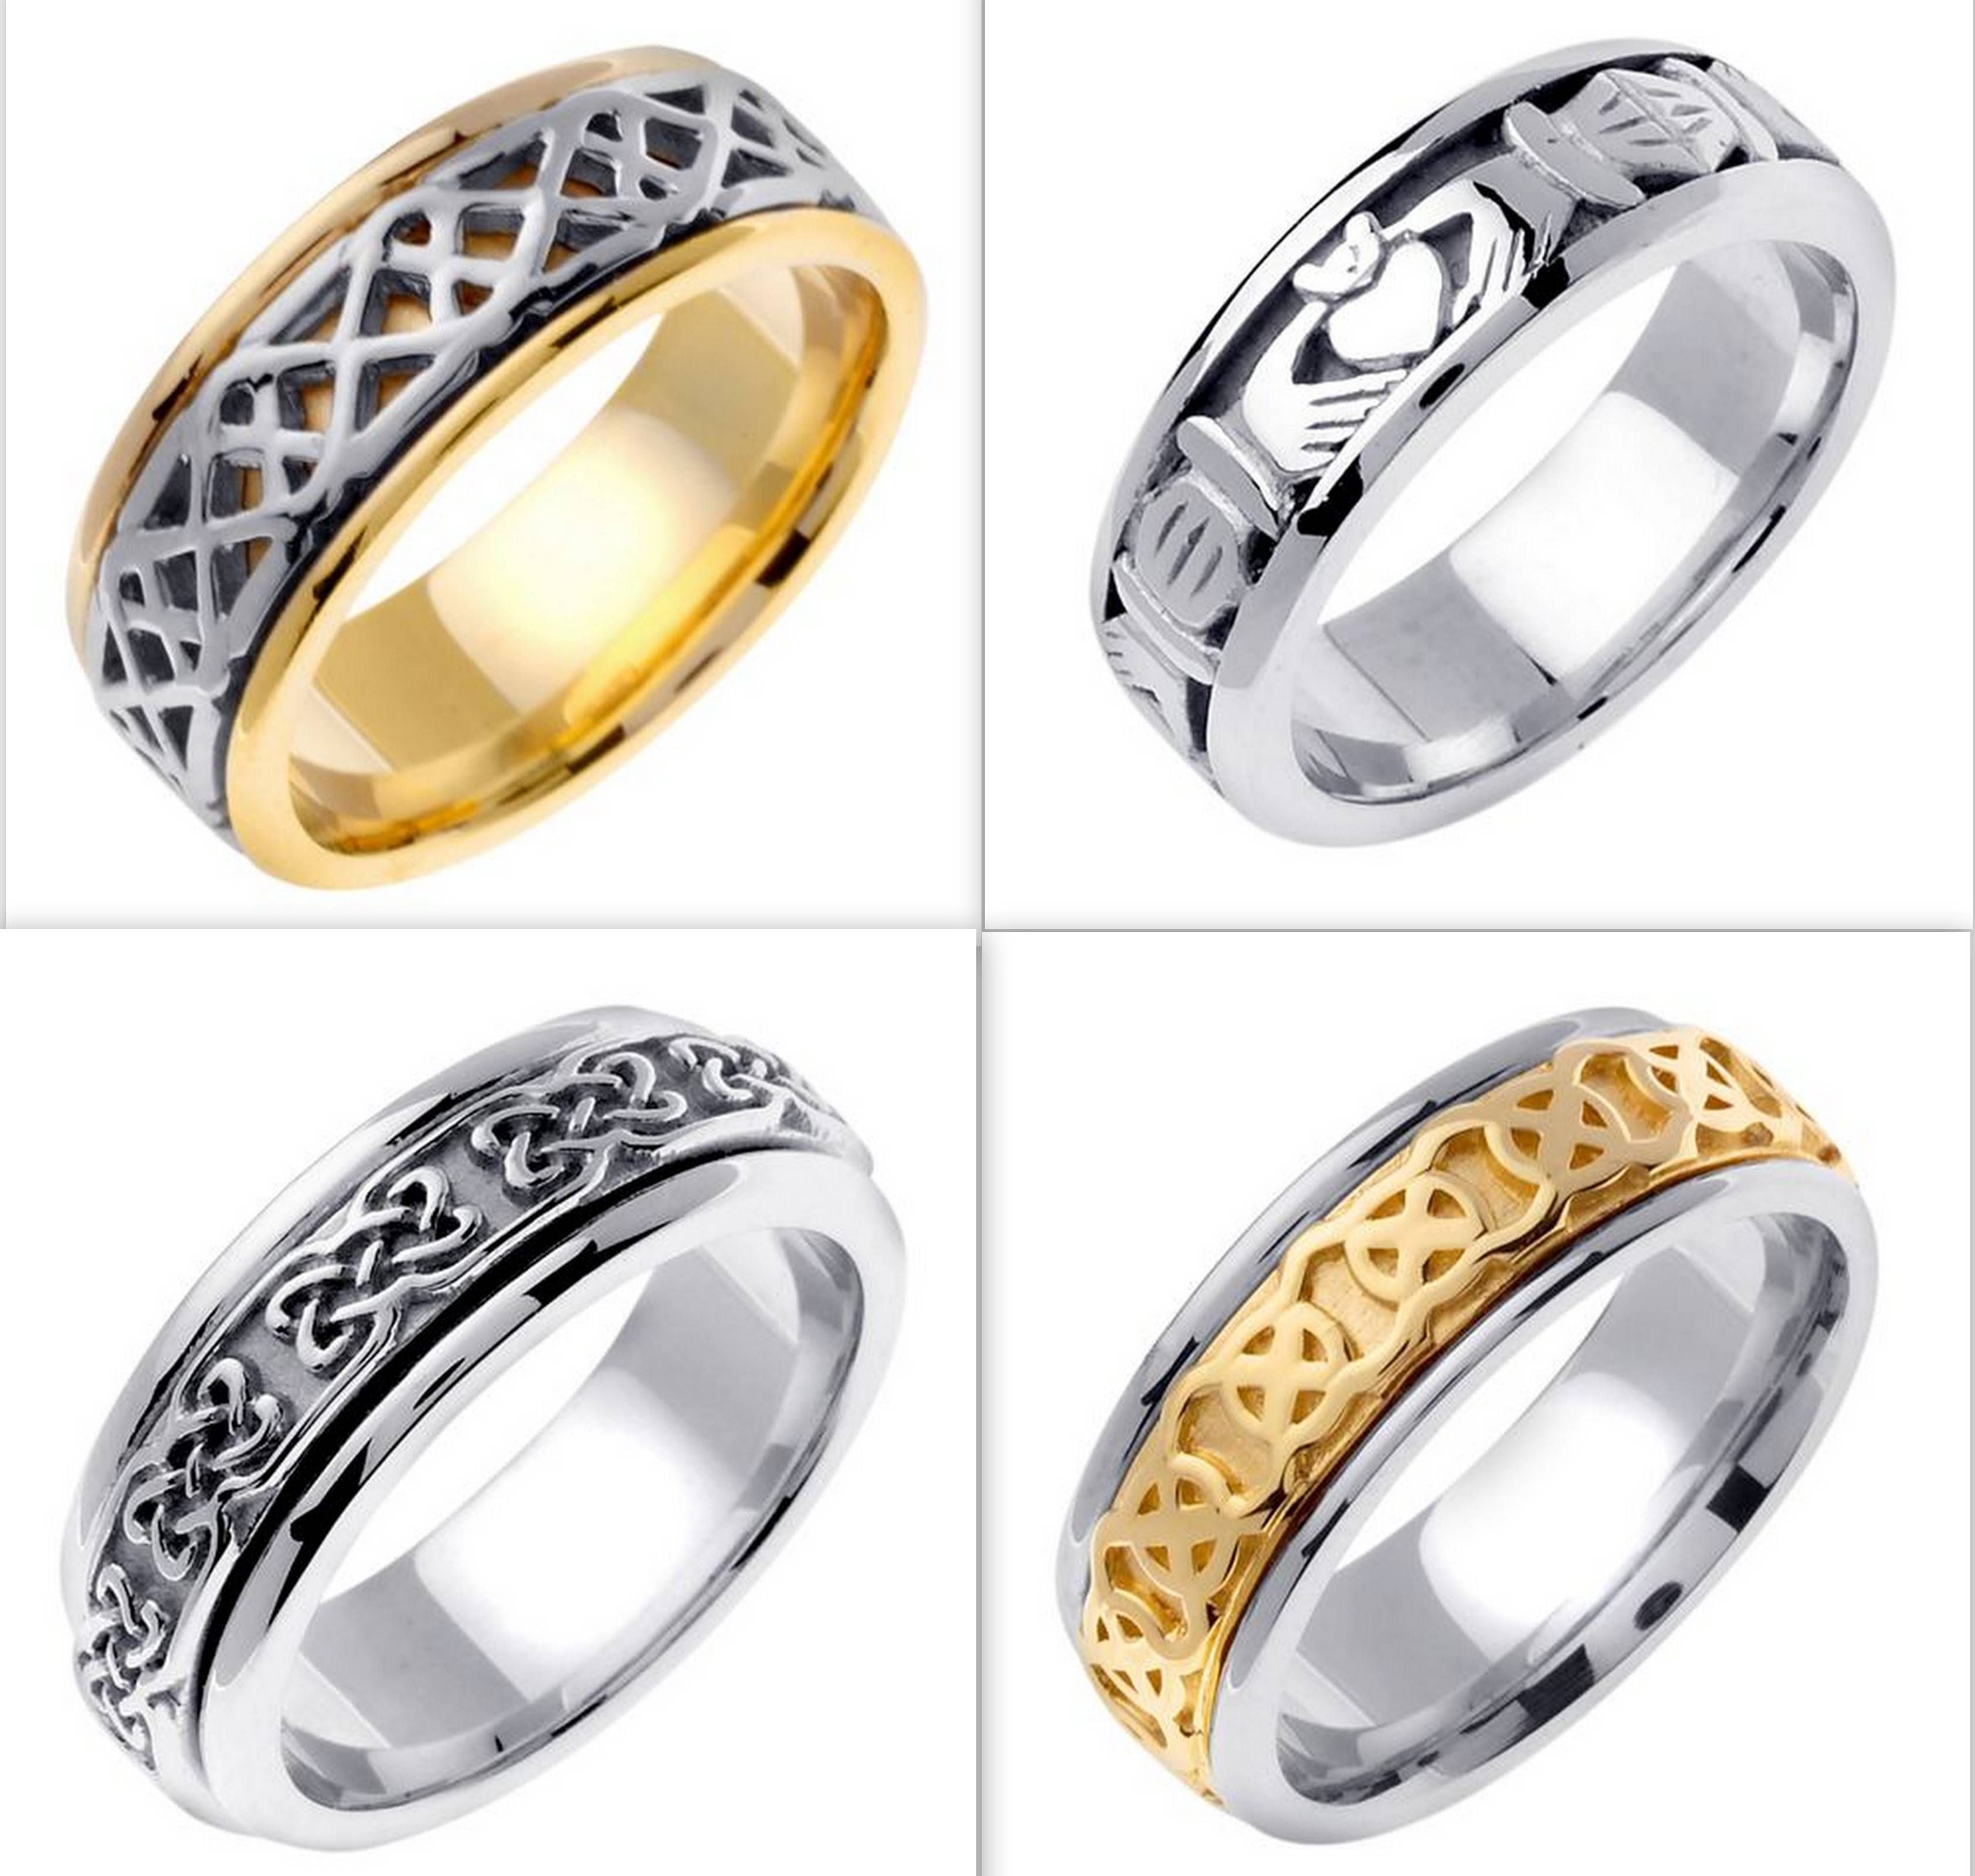 Several Things To Select Irish Wedding Rings | Wedding Ideas Throughout Mens Celtic Wedding Rings (View 9 of 15)